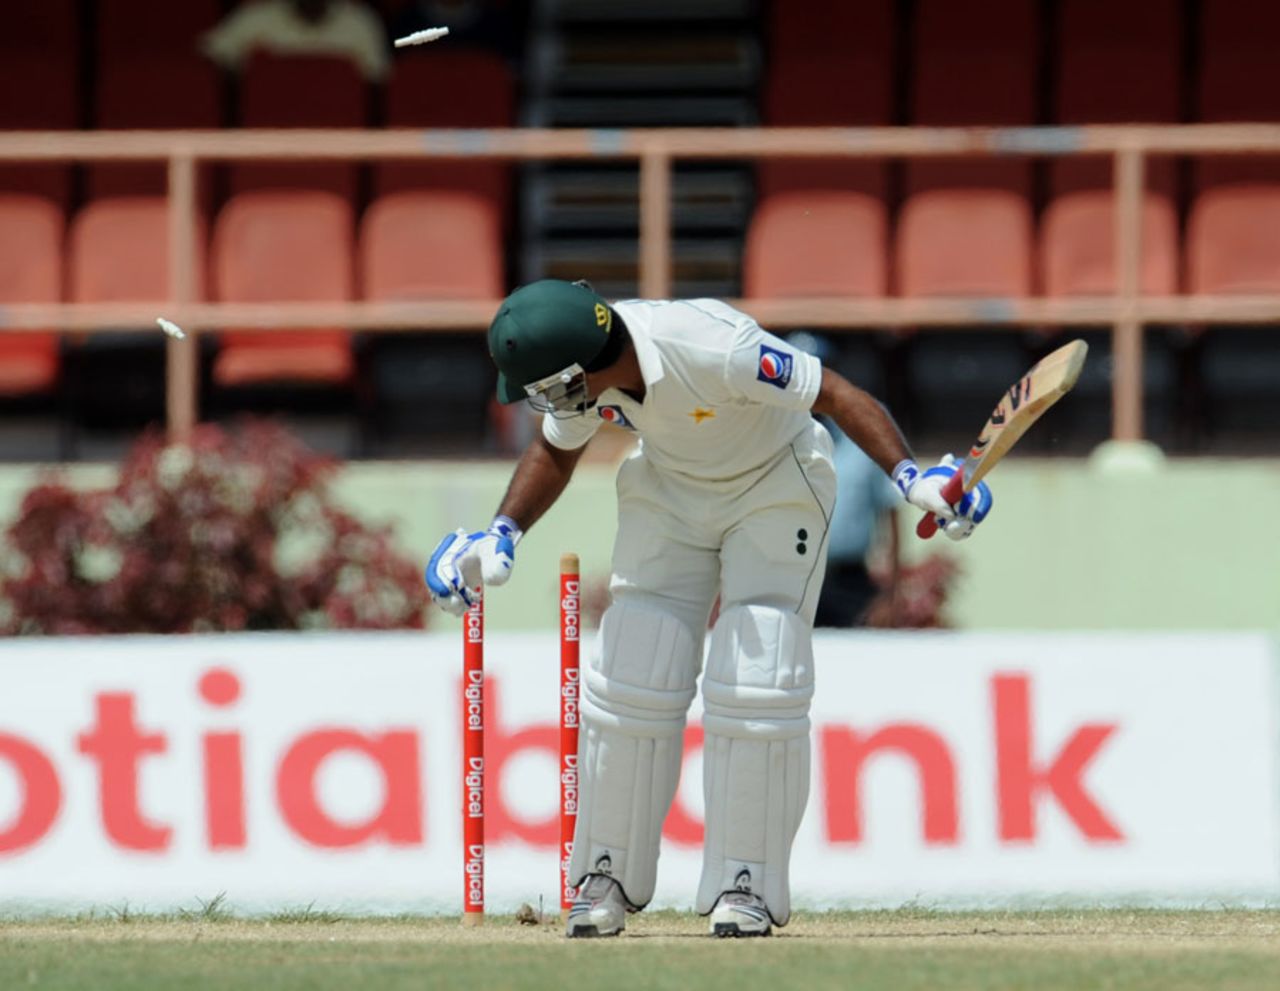 Asad Shafiq is bowled for 42, West Indies v Pakistan, 1st Test, Providence, 4th day, May 15, 2011